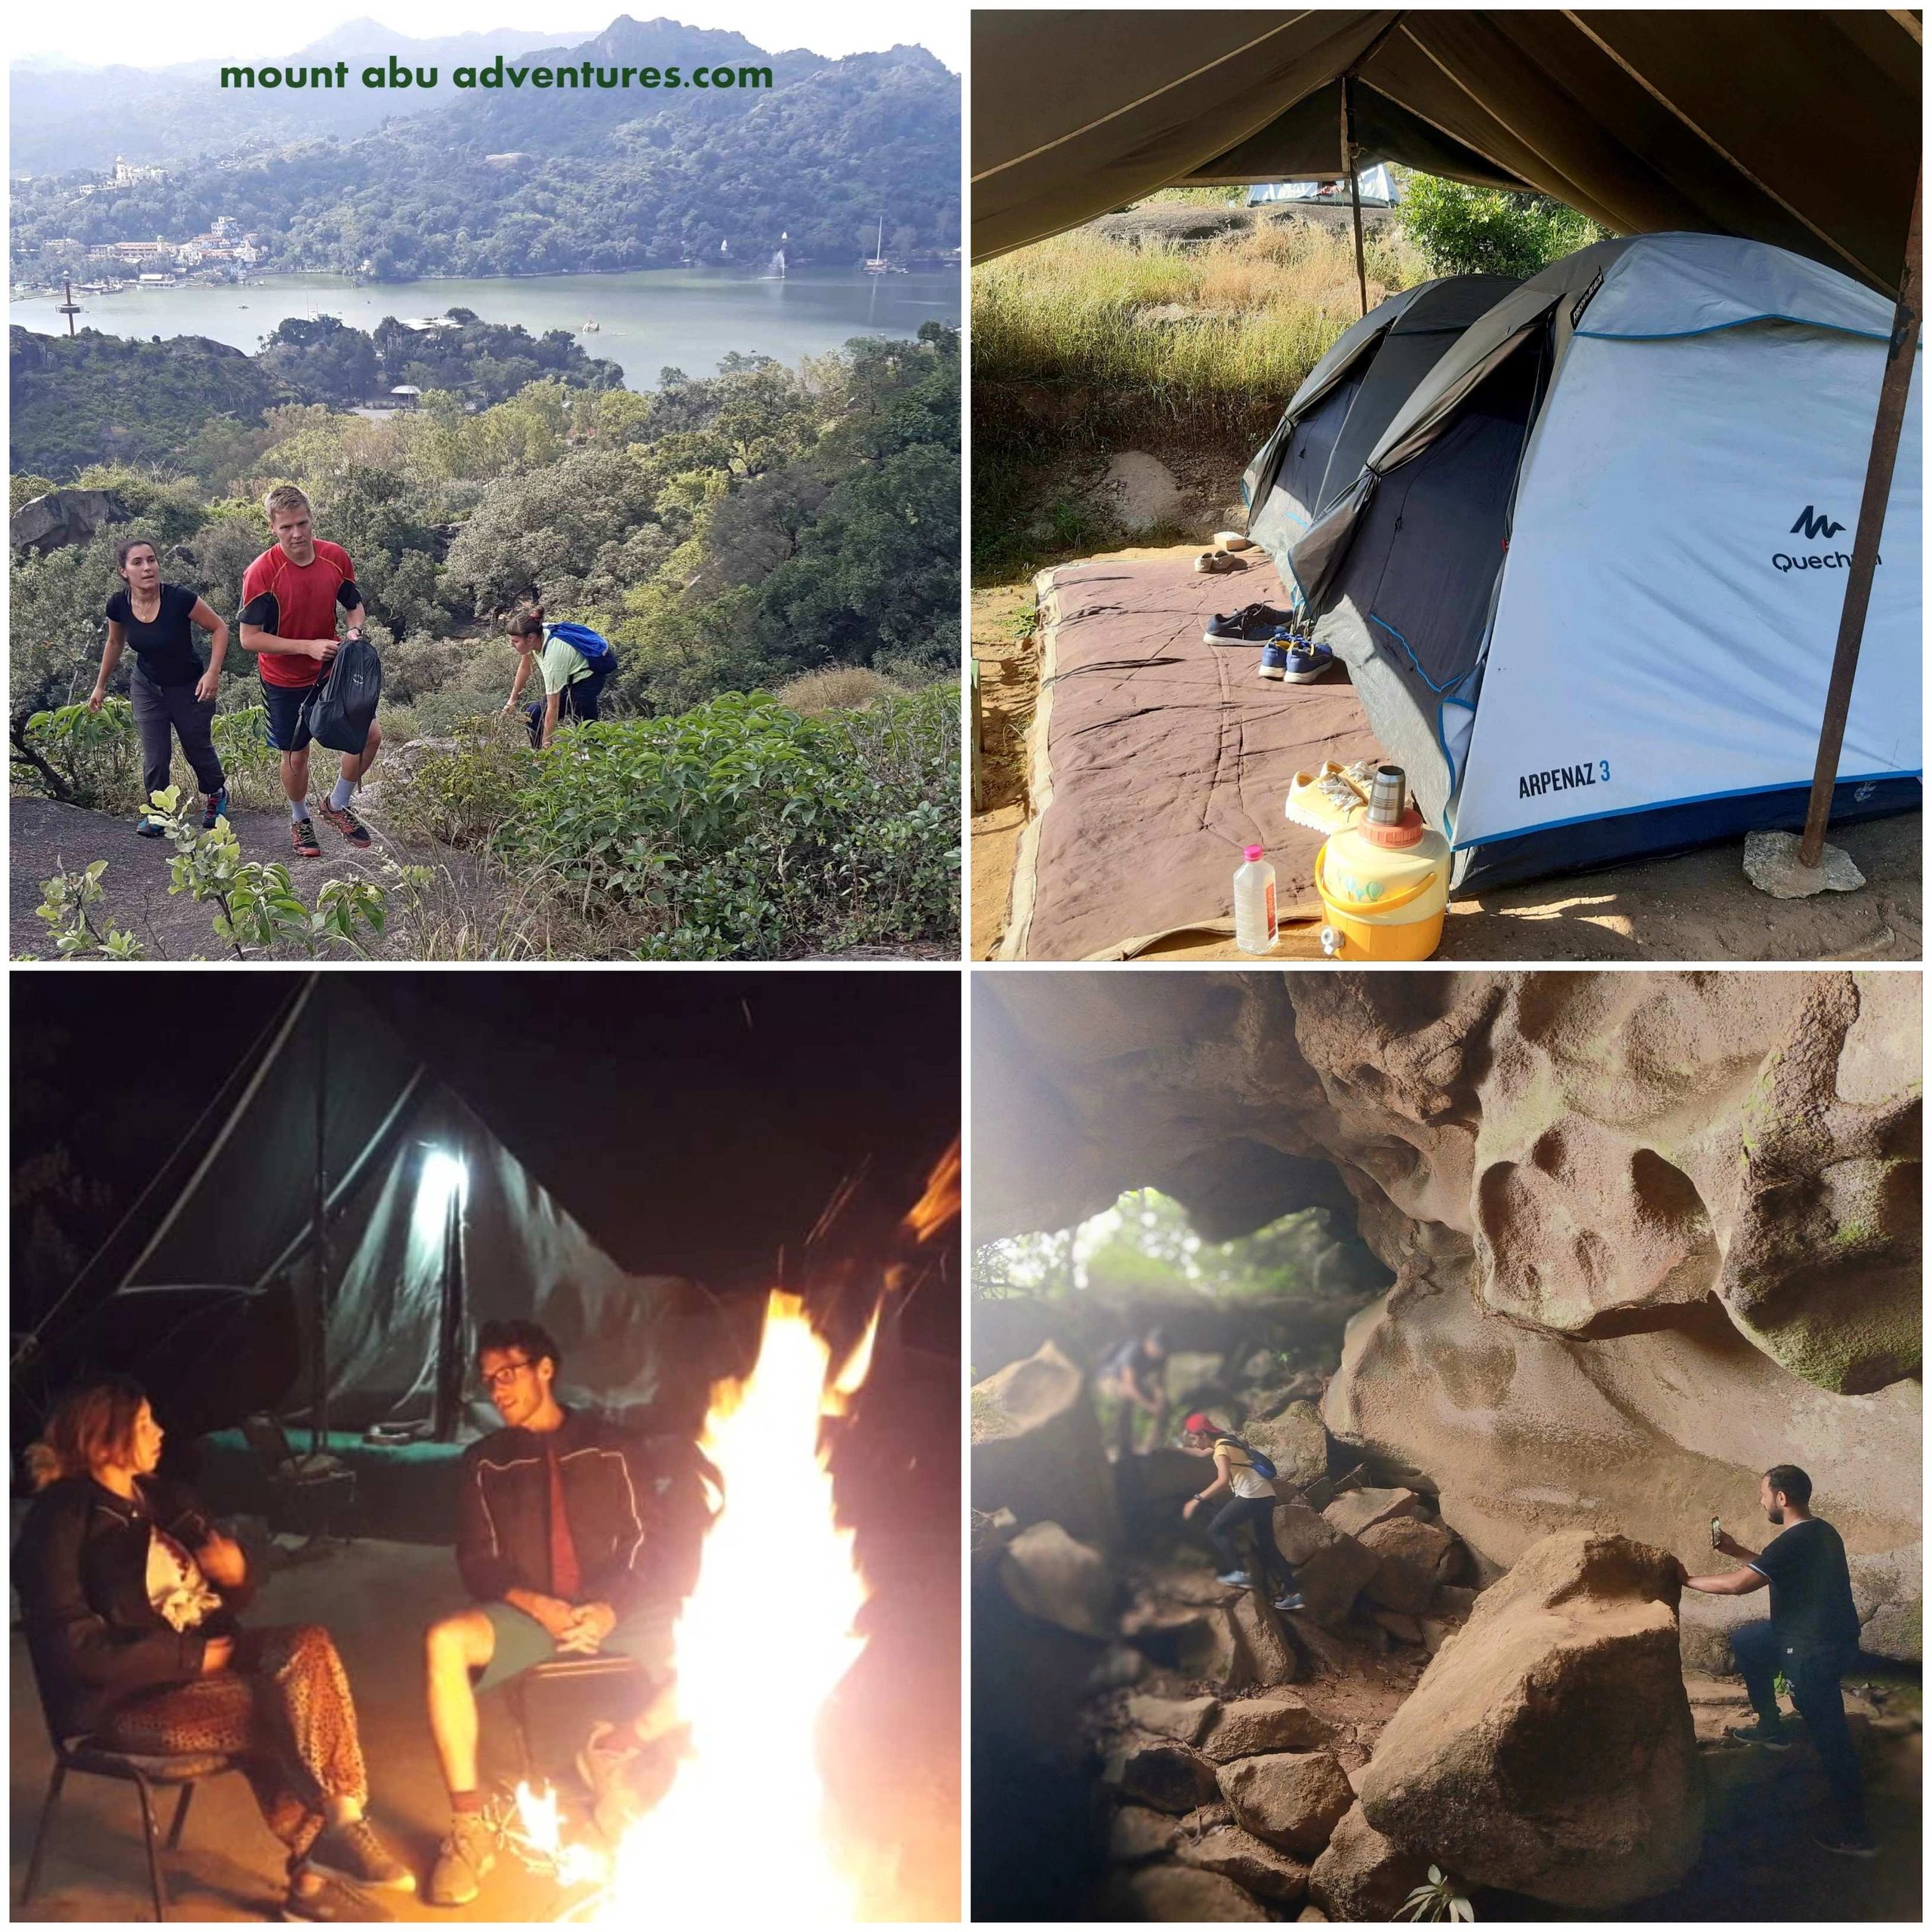 trekking camping in mount abu things to do in mount abu tourist attraction and camping in the jungle